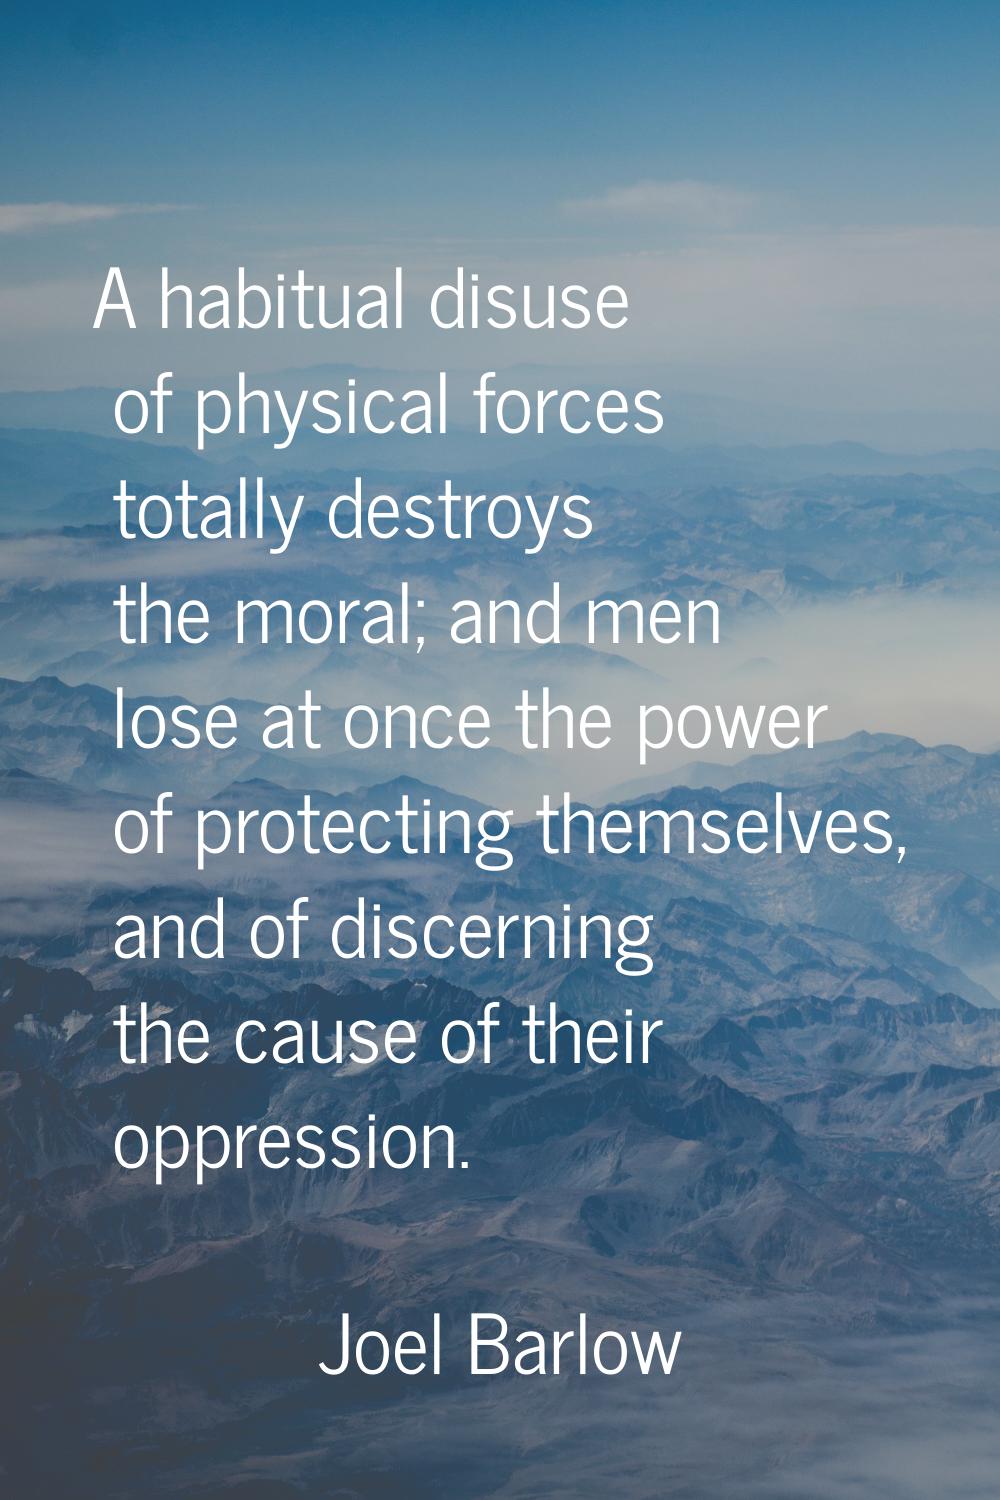 A habitual disuse of physical forces totally destroys the moral; and men lose at once the power of 